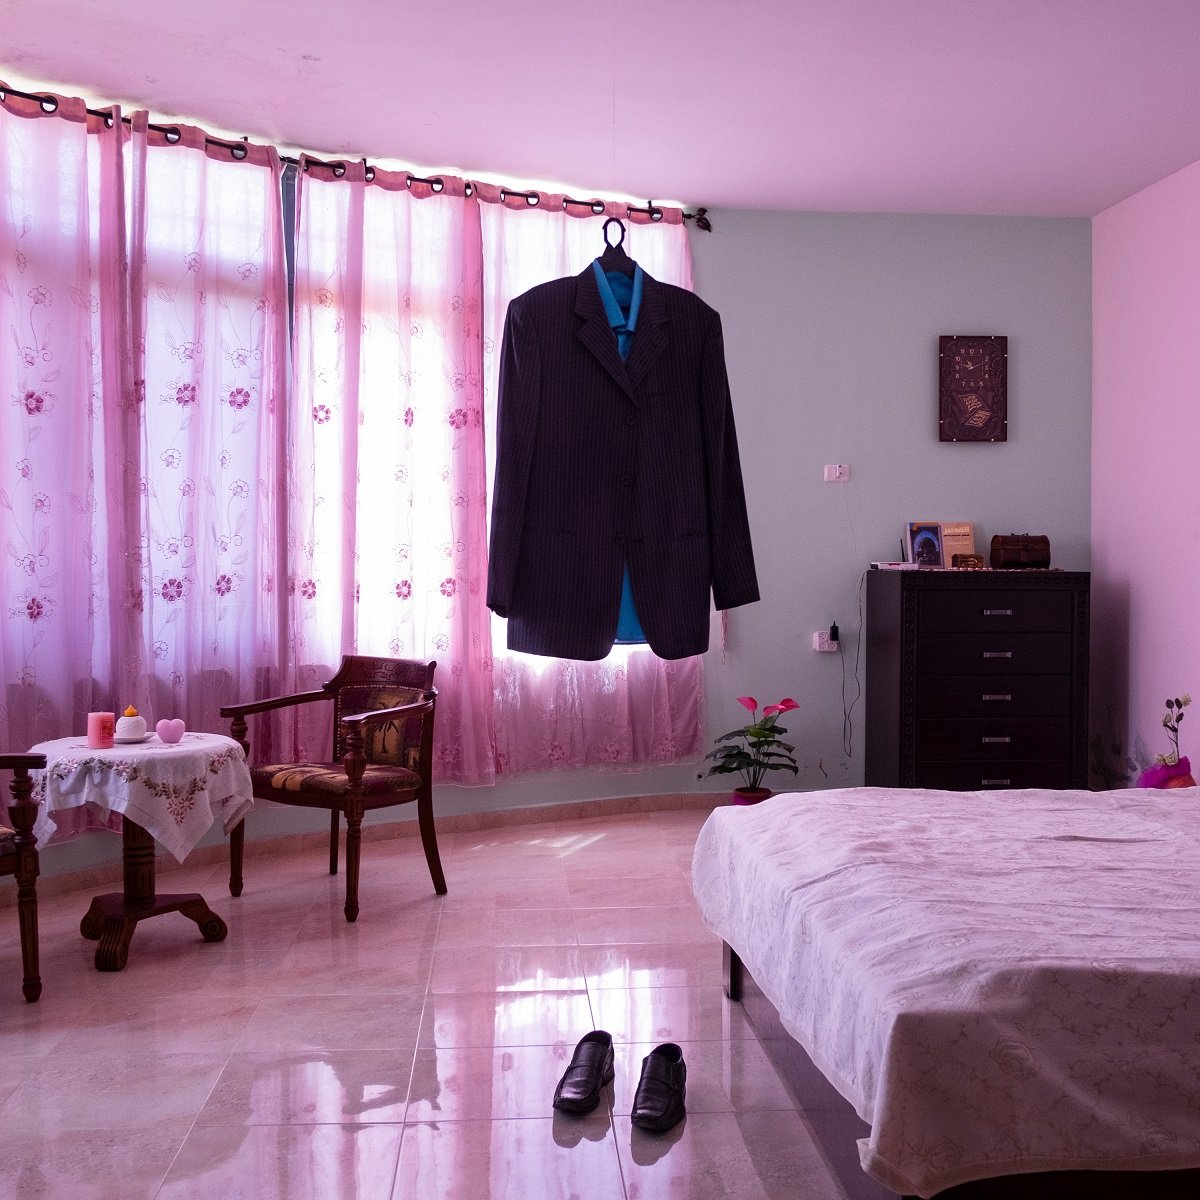 Habibi © Antonio Faccilongo, Italy, Getty Reportage. Nael al-Barghouthi’s suit remains hanging in his bedroom in Kobar, near Ramallah, Palestine, on 17 August 2015. Al-Barghouthi’s wife, Iman Nafi, keeps all her husband’s clothes and belongings in place. Al-Barghouthi was arrested in 1978 after an anti-Israel commando operation. He was released in 2011, married Iman Nafi, but re-arrested in 2014 and sentenced to life imprisonment. He has spent more than 40 years in prison—the longest-serving Palestinian inmate in Israeli jails.